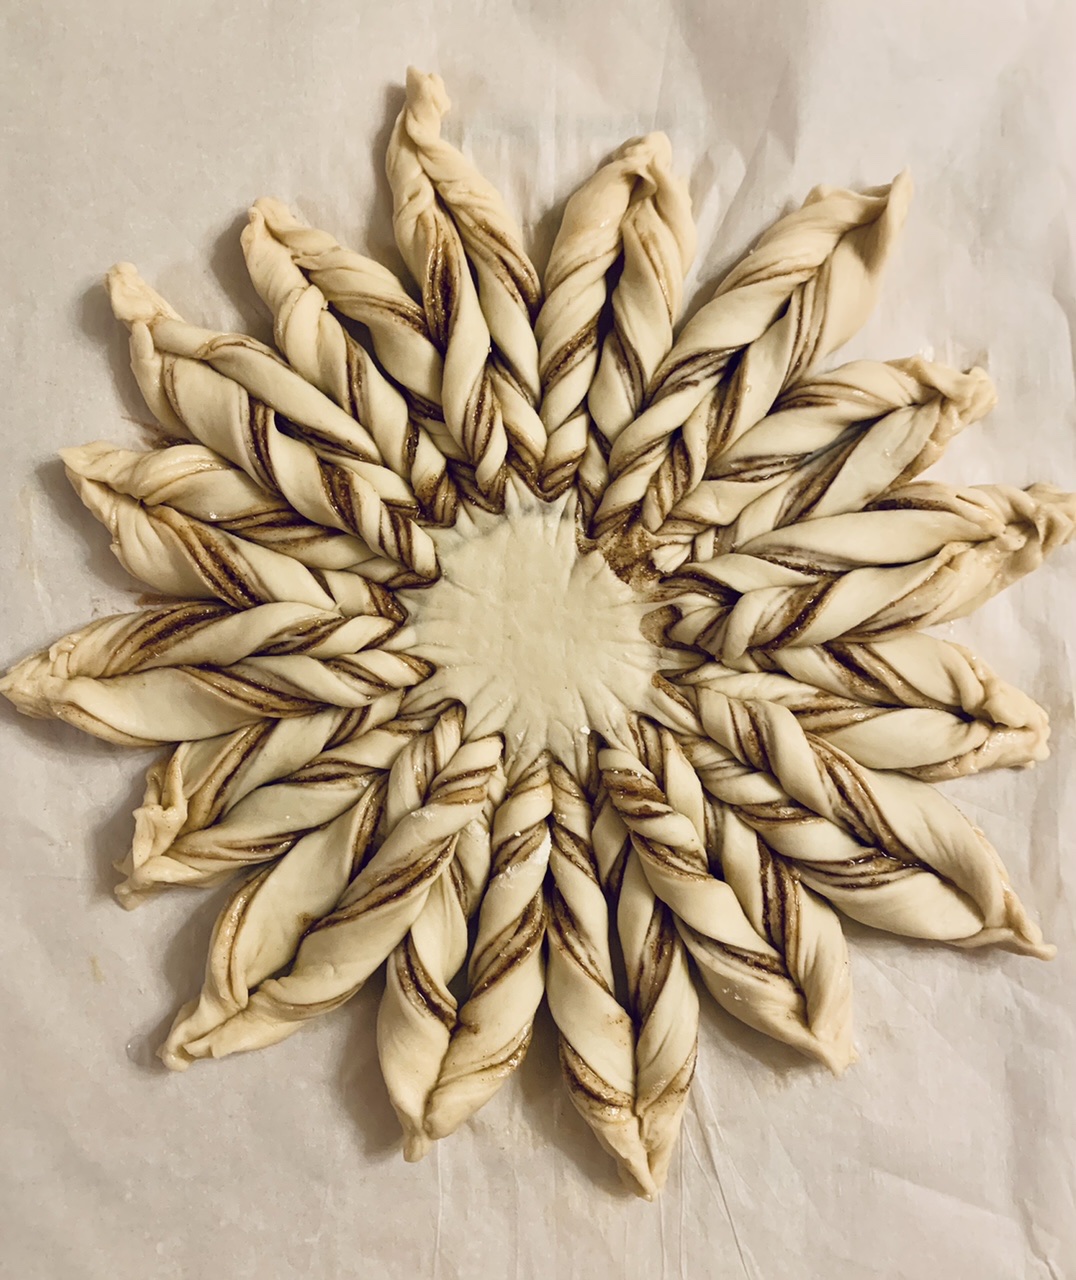 How to Make 16-Point Star Bread